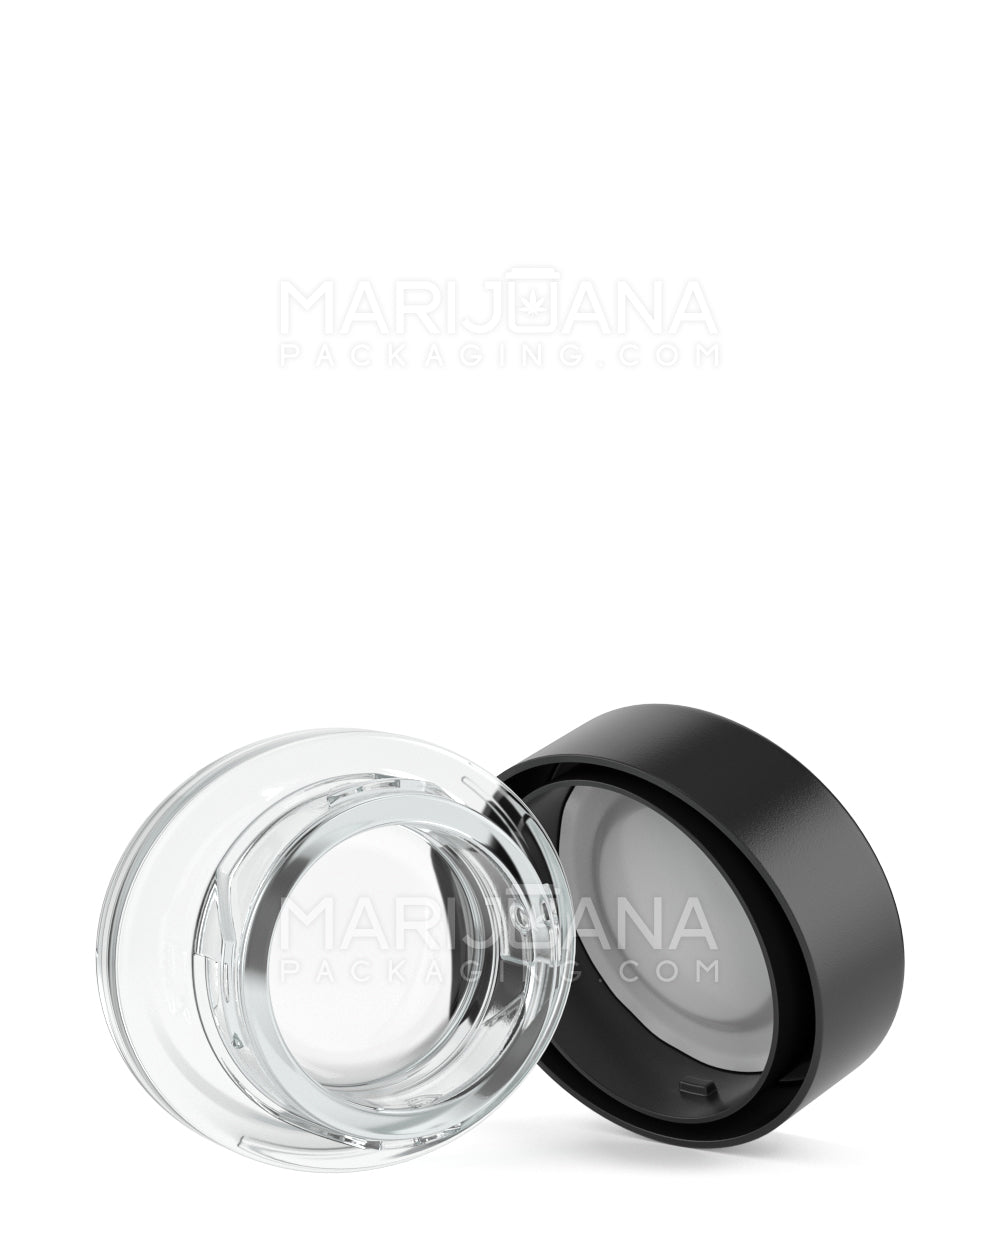 Child Resistant | Clear Glass Oval Concentrate Jar w/ Black Cap | 45mm - 5mL - 240 Count - 1